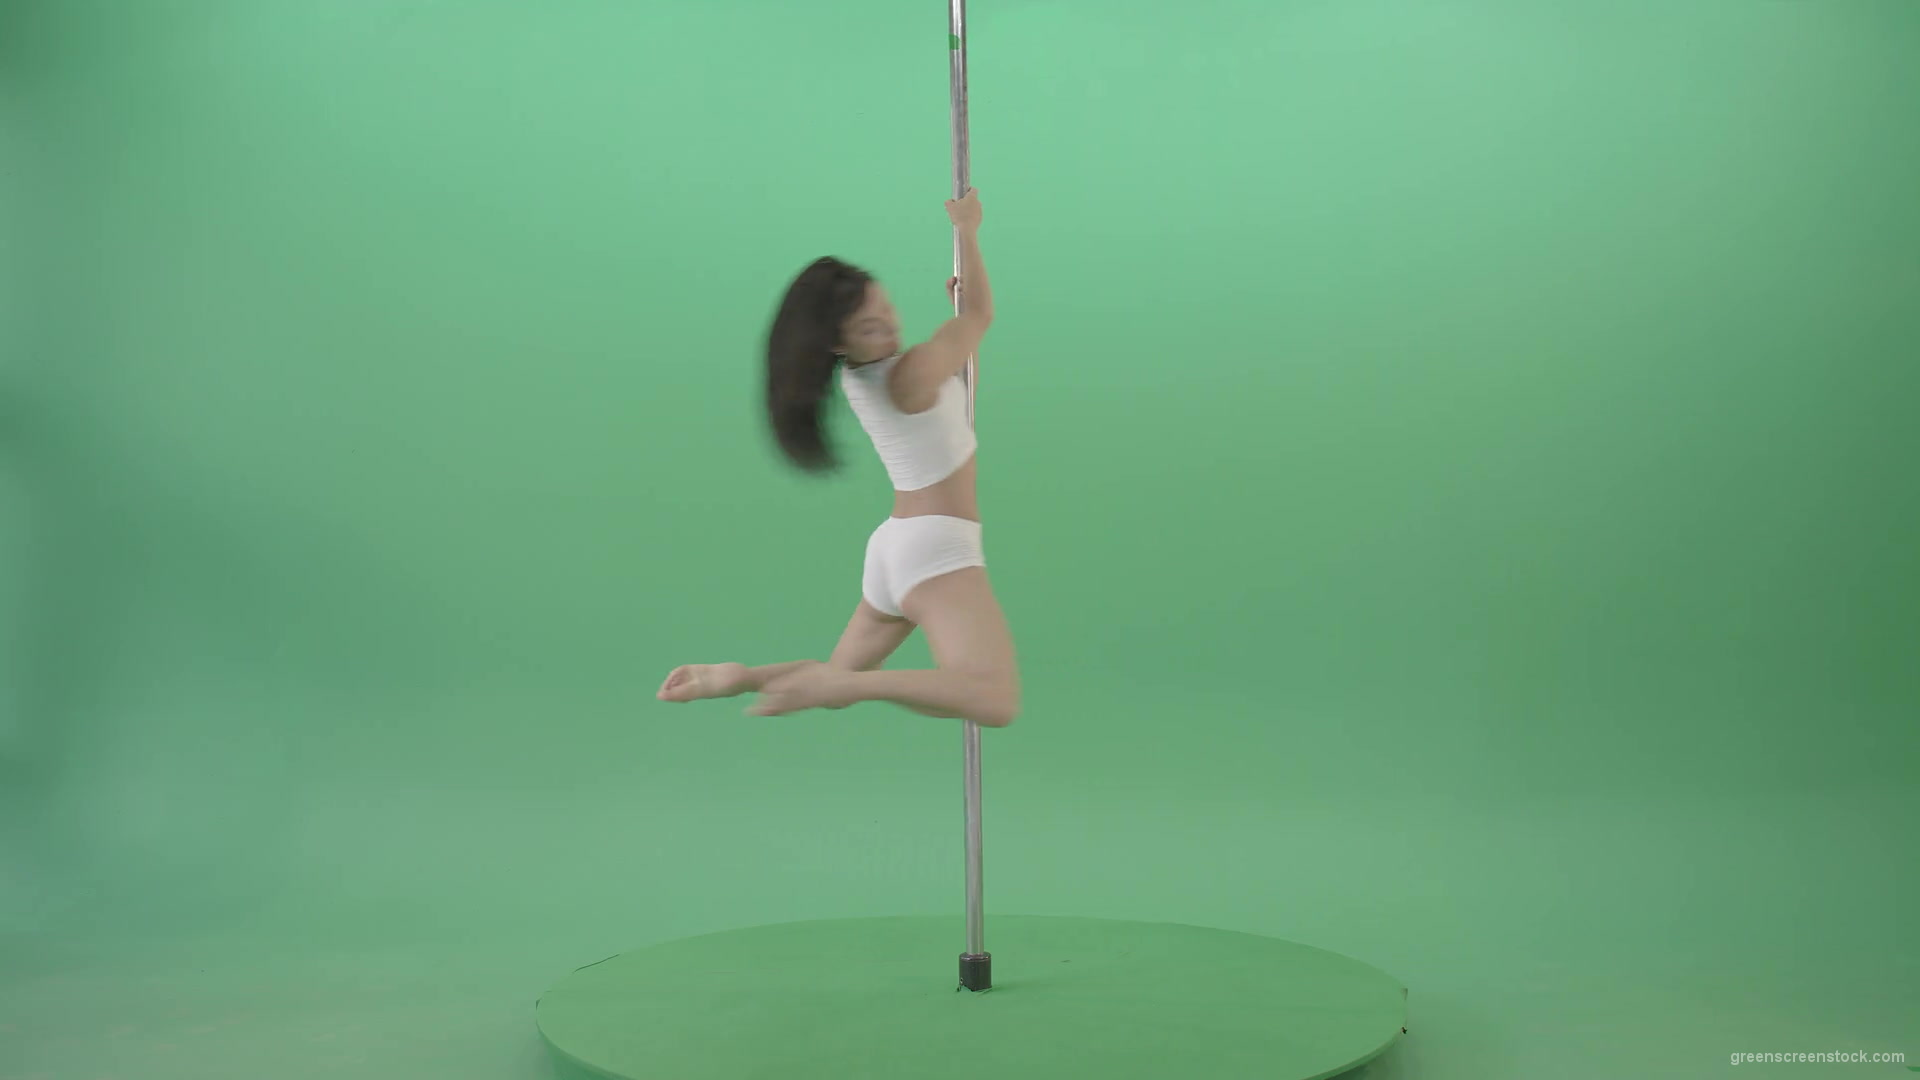 Small-Girl-make-spin-pole-fly-isolated-on-green-screen-4K-Video-Footage--1920_004 Green Screen Stock